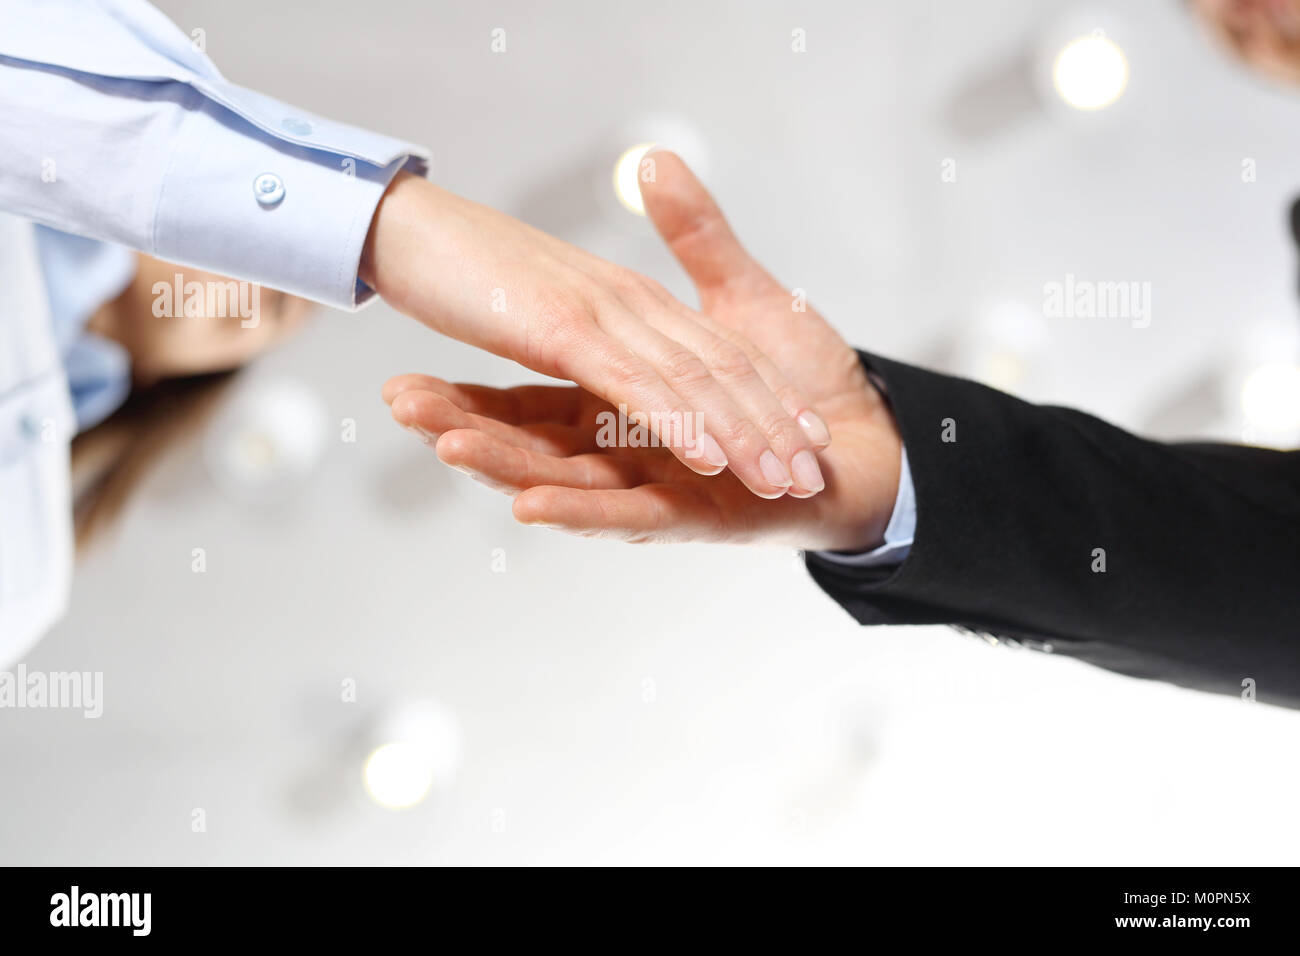 Congratulations. Welcome new employee of the company. Hand of a woman and a man in office clothes during a welcome gesture. Stock Photo